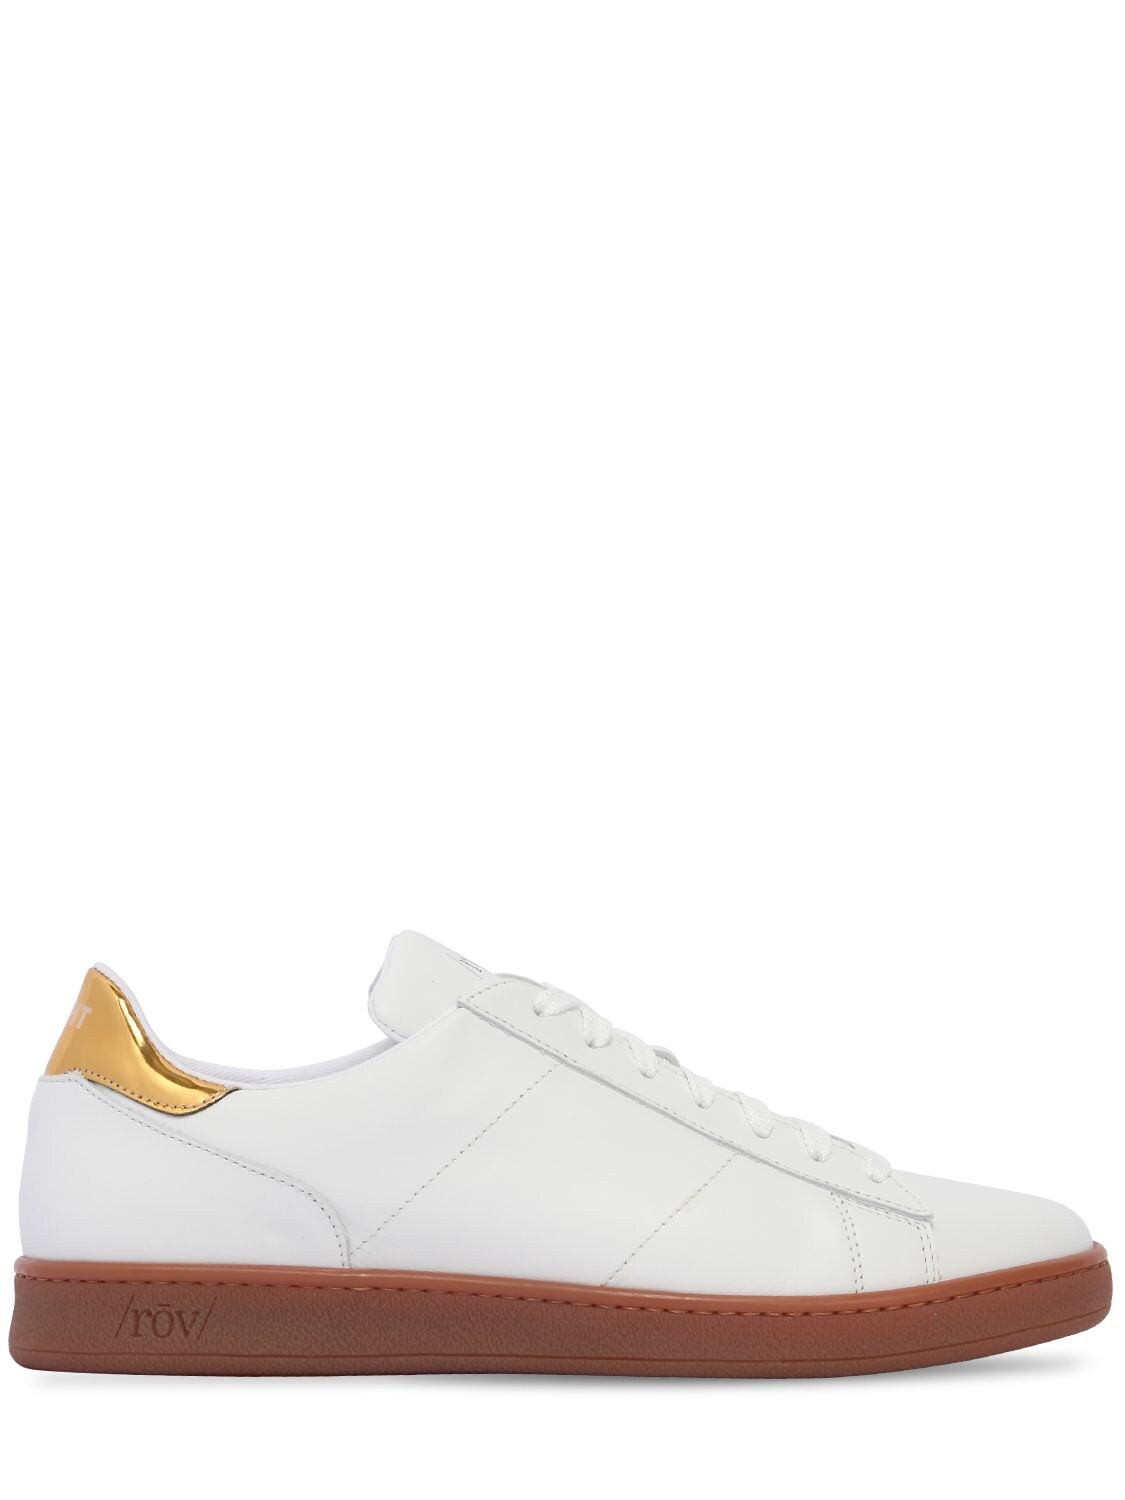 Rov Leather Honey Sole Sneakers In White/gold